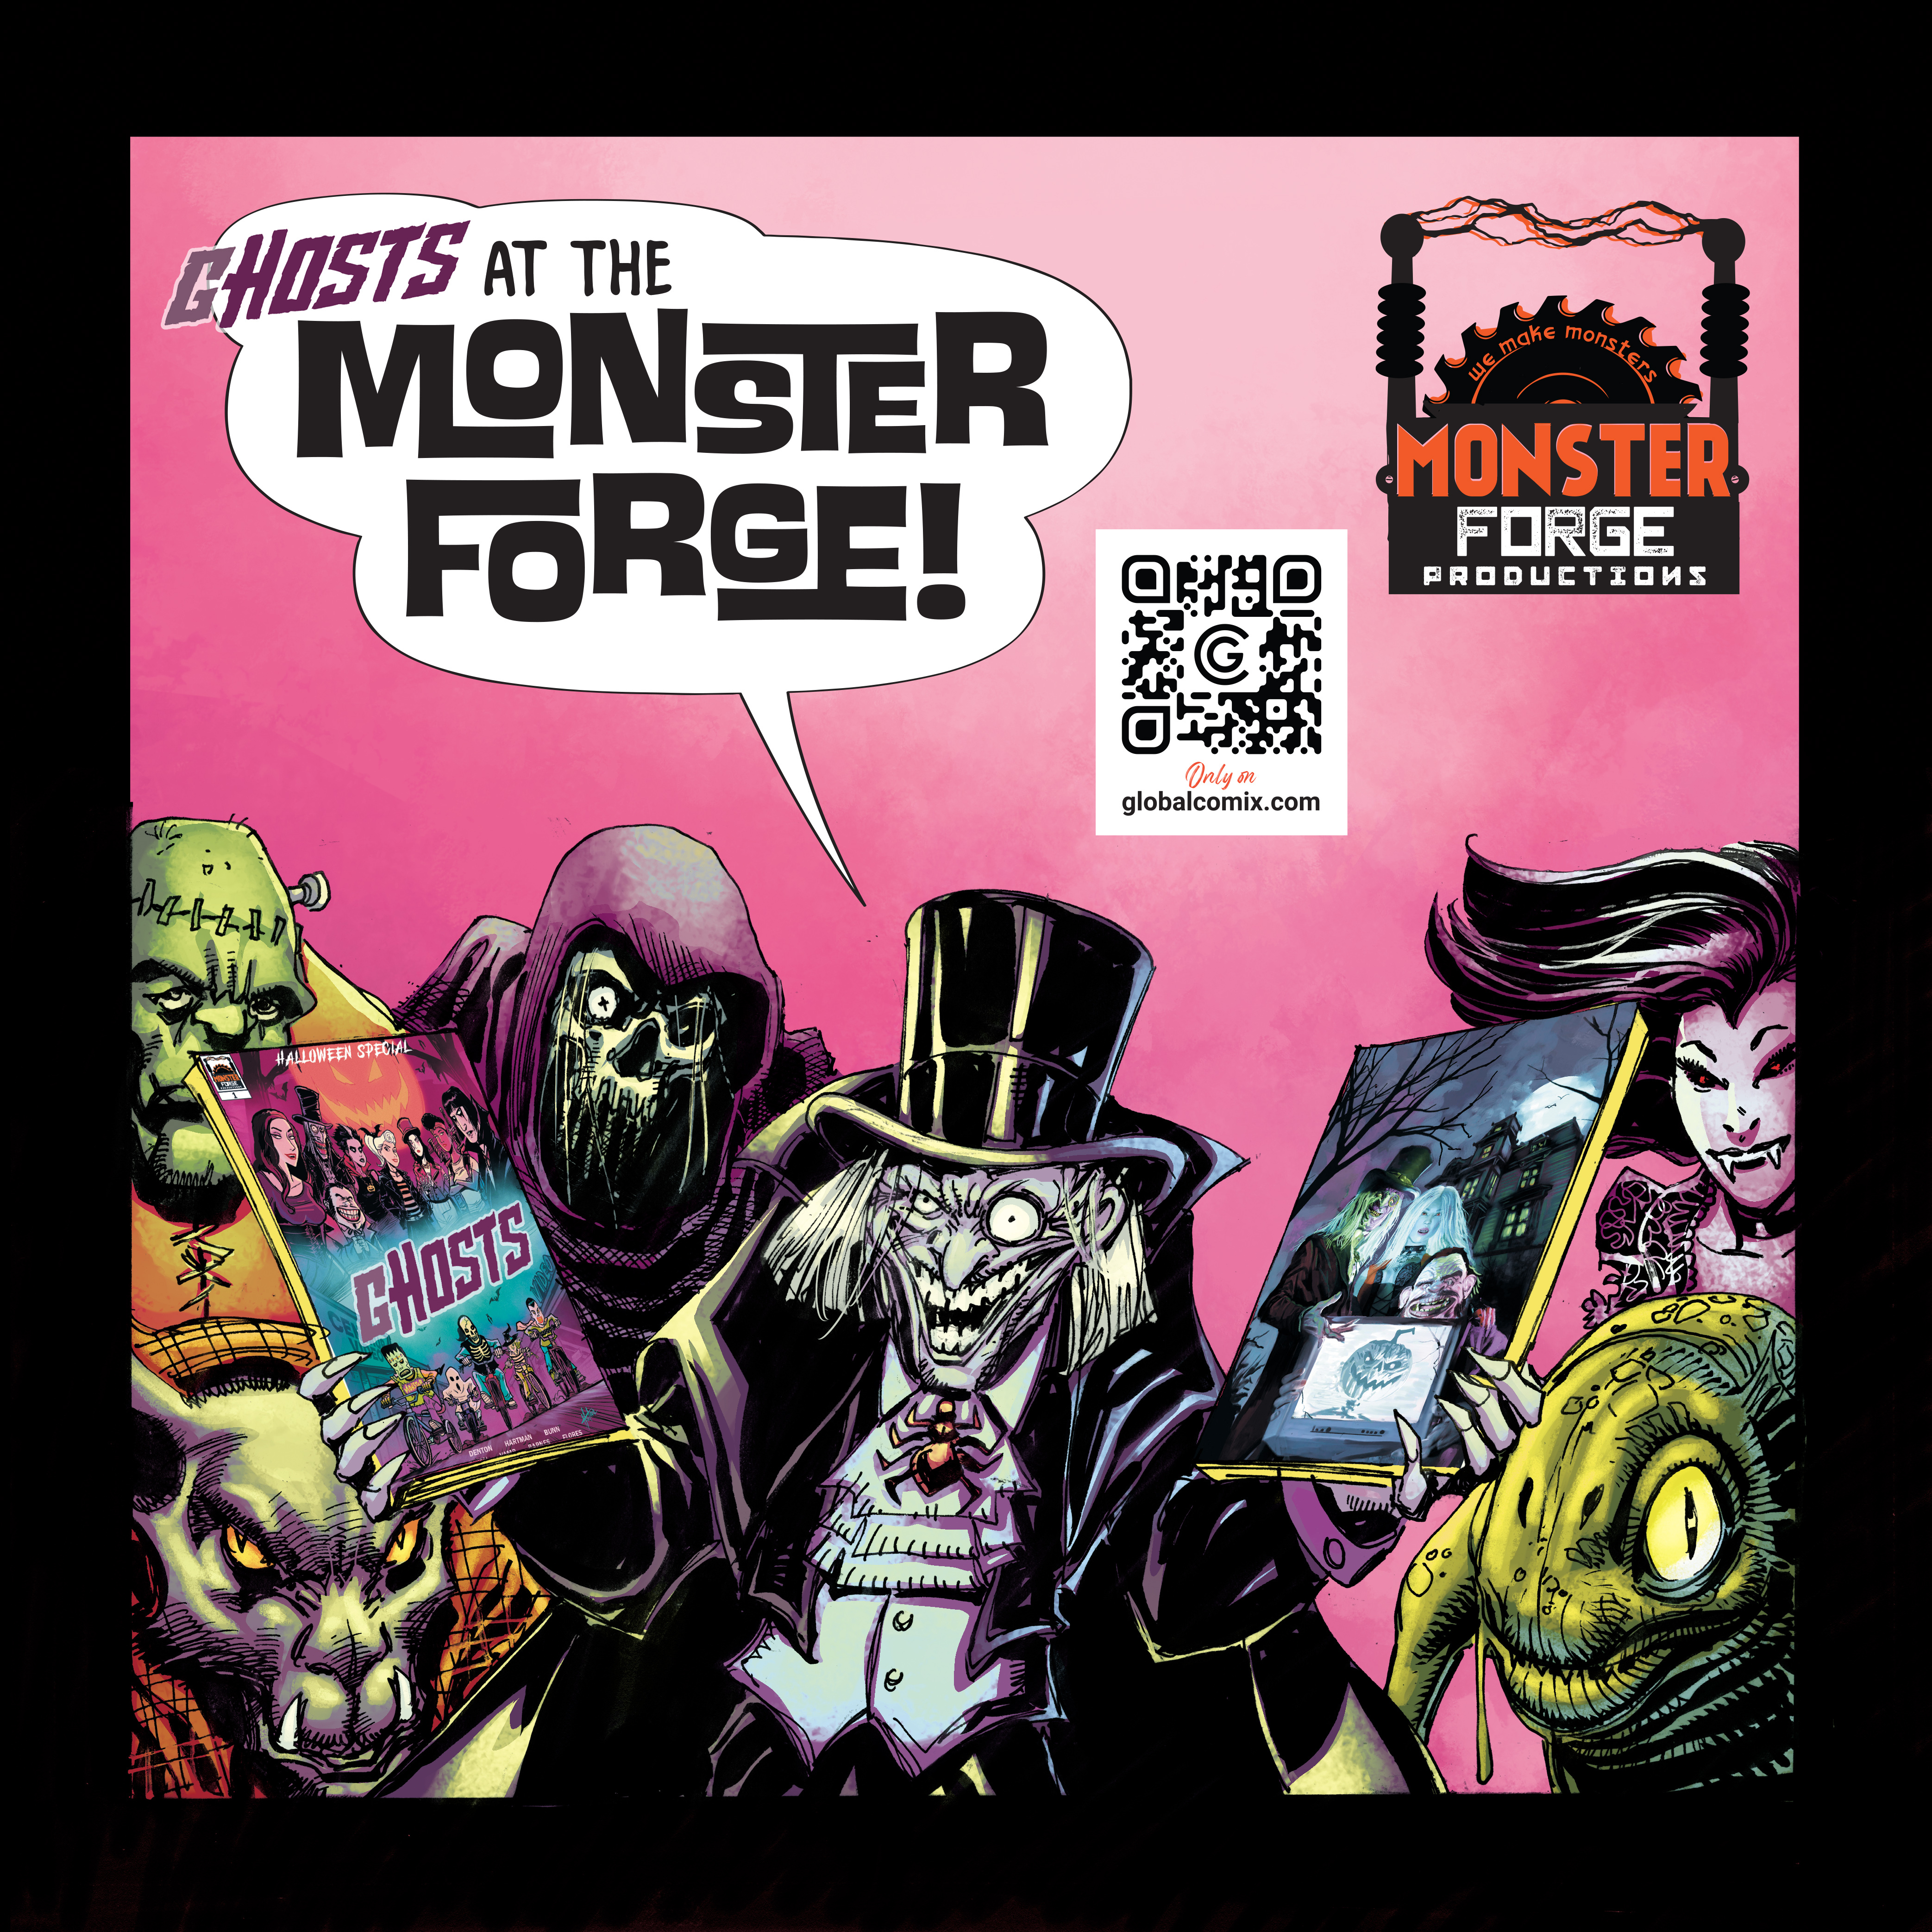 Monster Forge lets loose gHosts